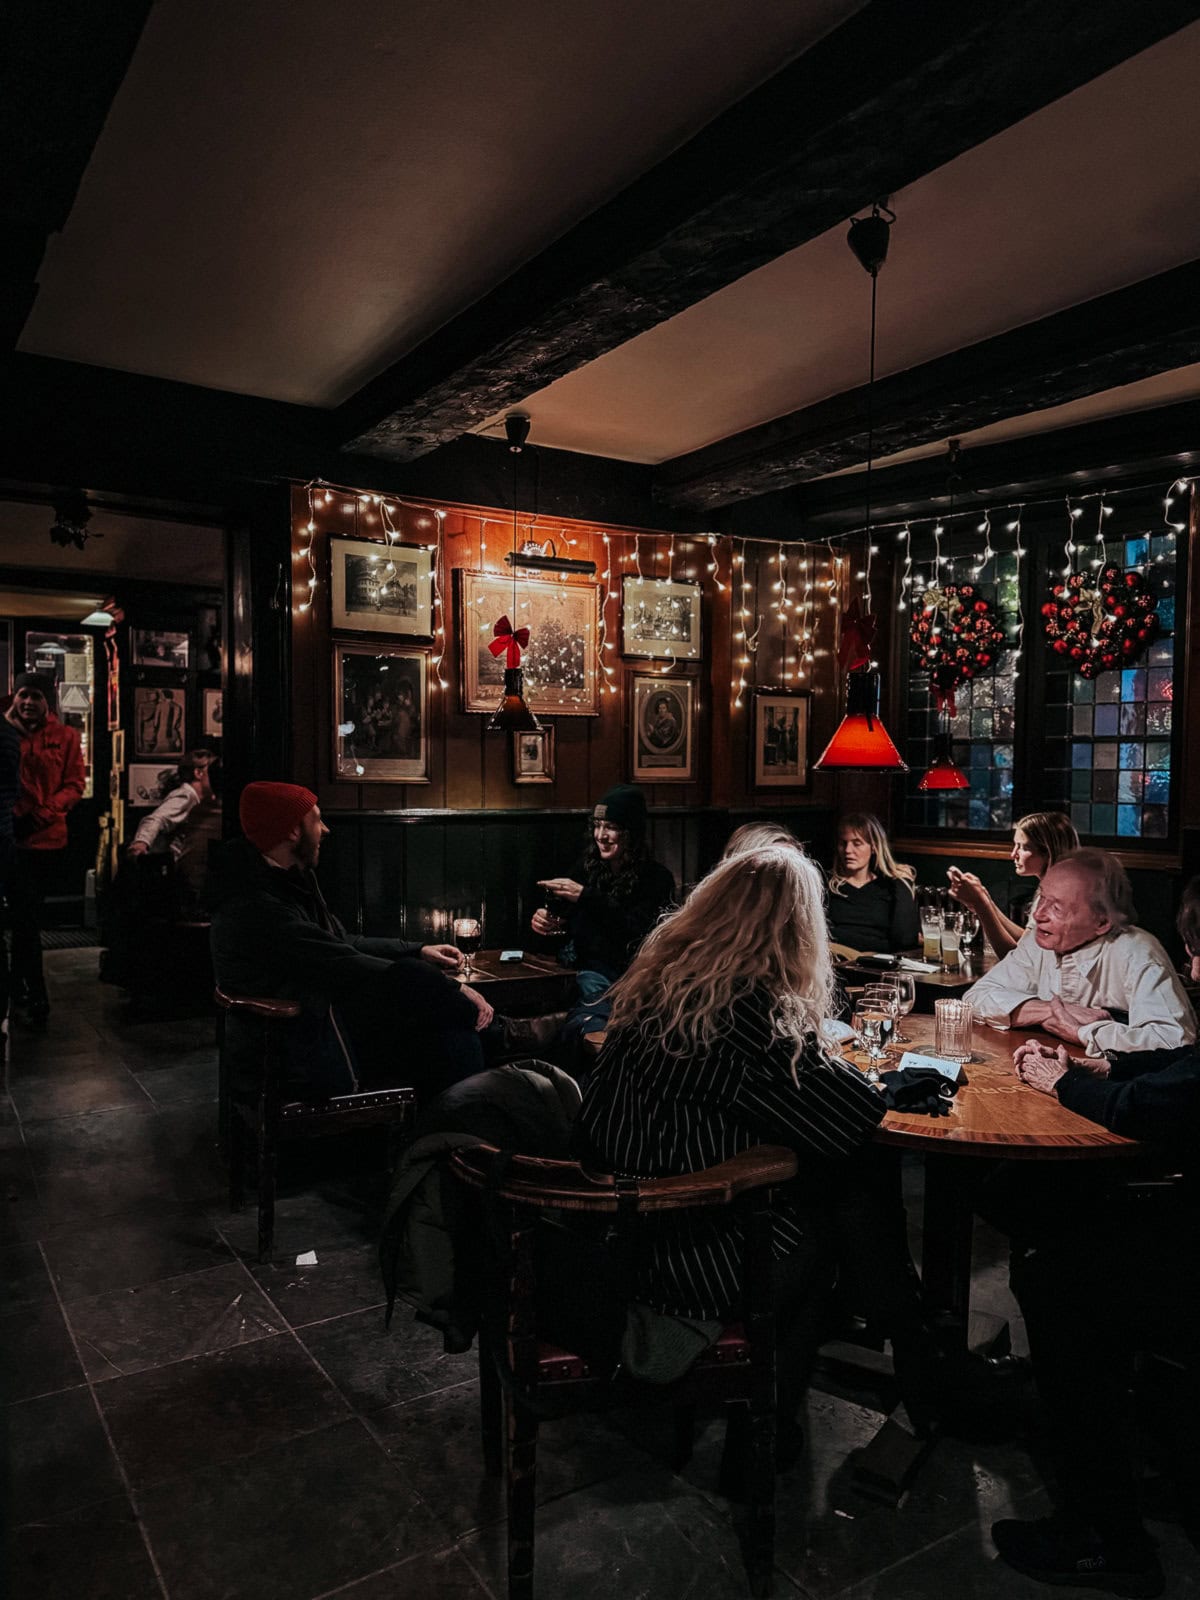 An atmospheric pub scene decorated with Christmas lights and vintage memorabilia on the walls, featuring patrons enjoying drinks and conversations at wooden tables